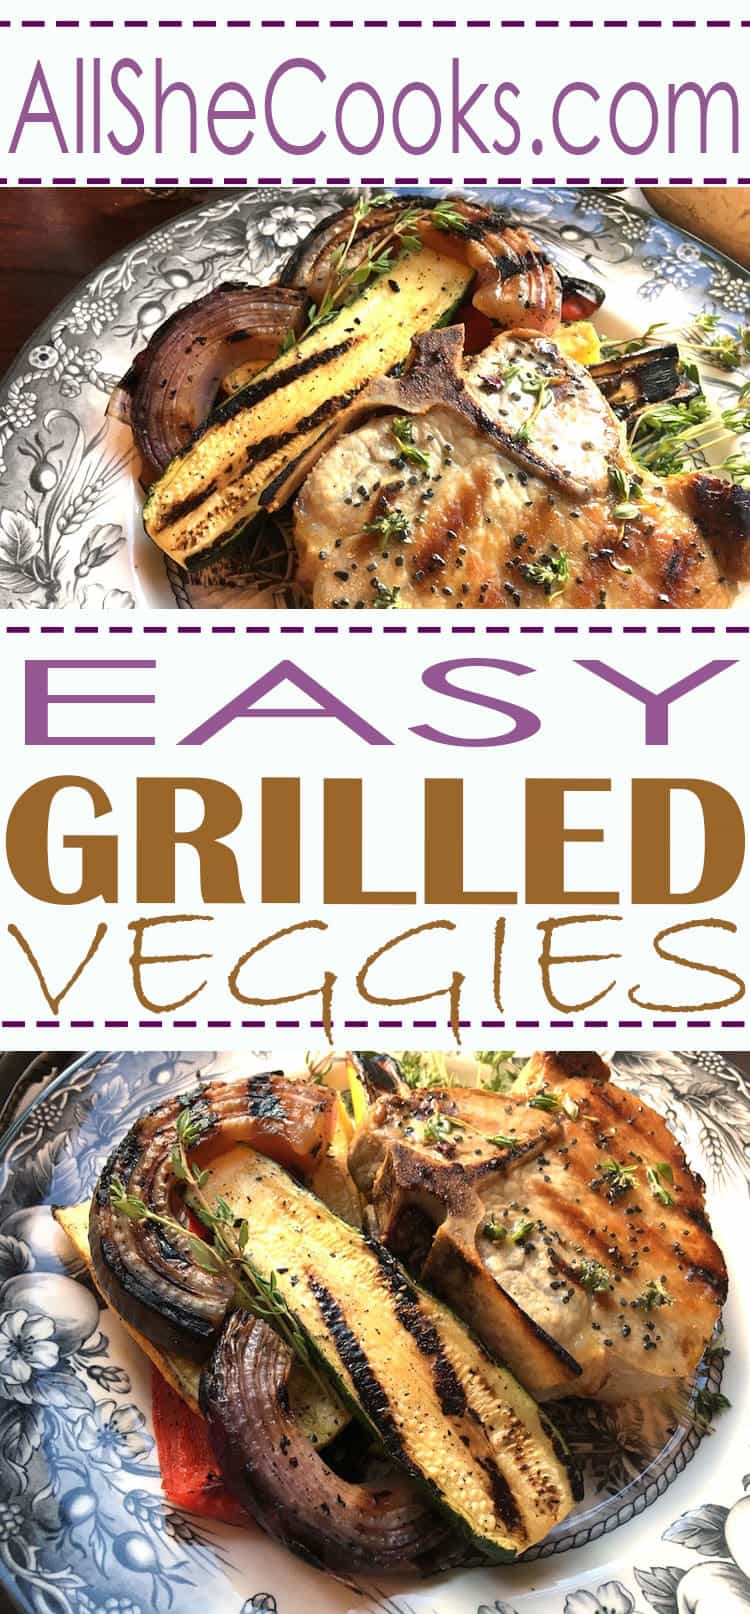 Learn how to make easy grilled veggies with this recipe. Healthy veggies are a great side dish for any summer meal.